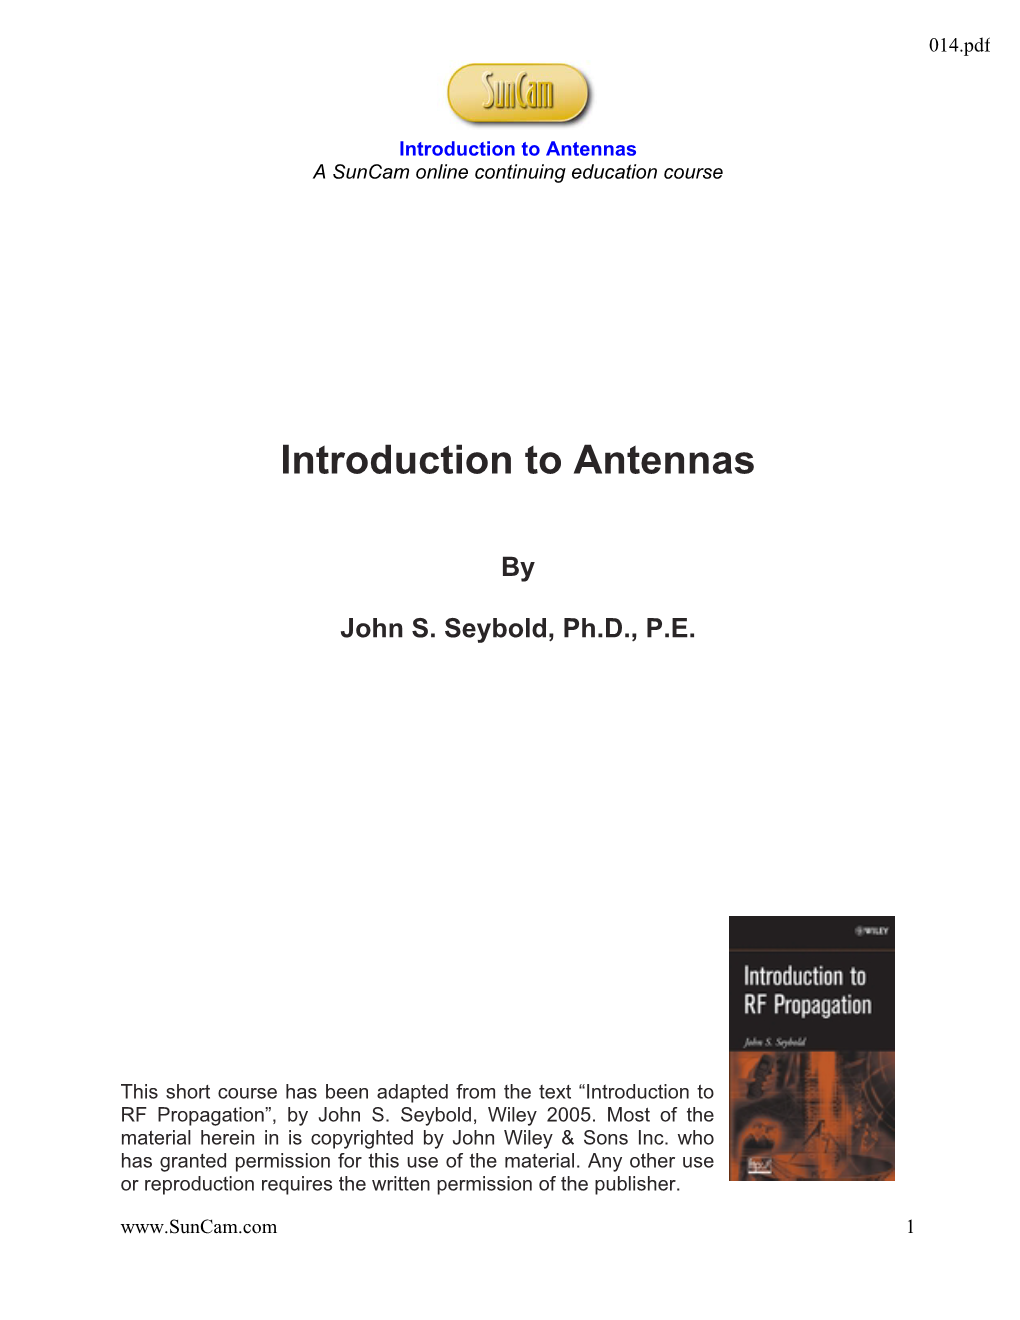 Introduction to Antennas a Suncam Online Continuing Education Course